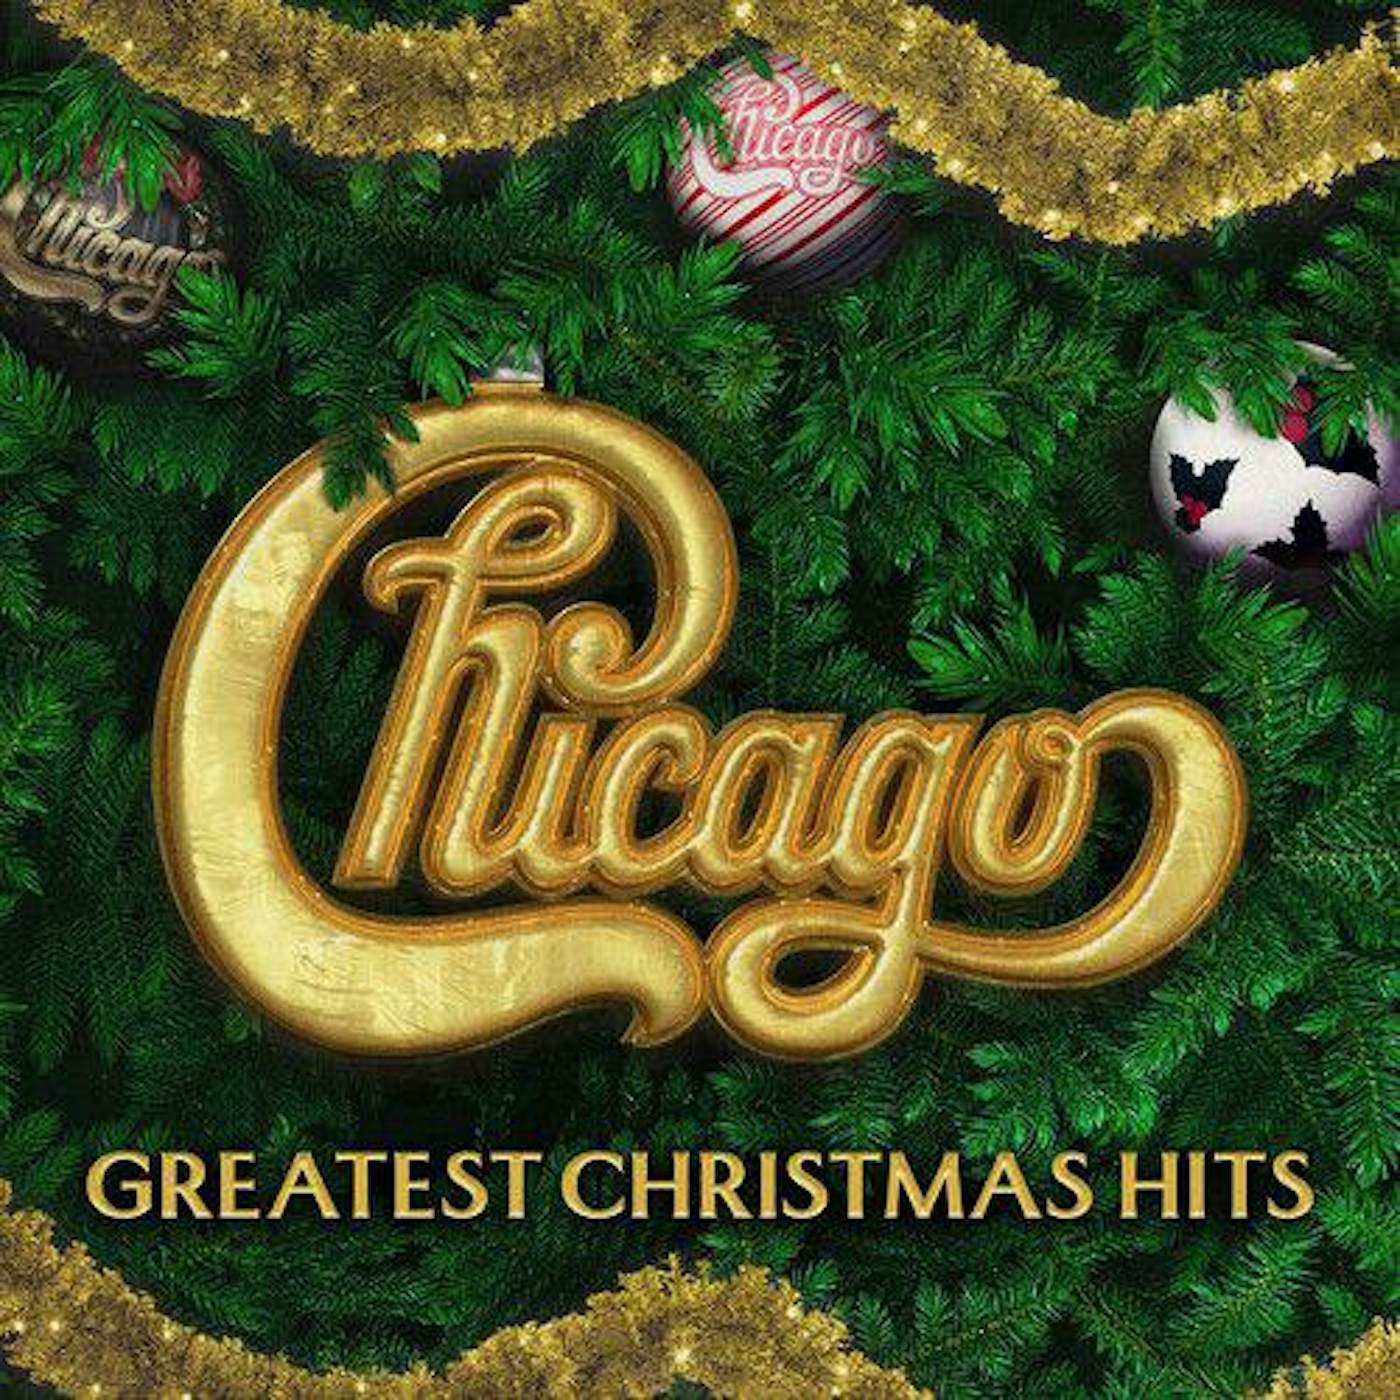 Chicago Greatest Christmas Hits (Limited/Red) Vinyl Record